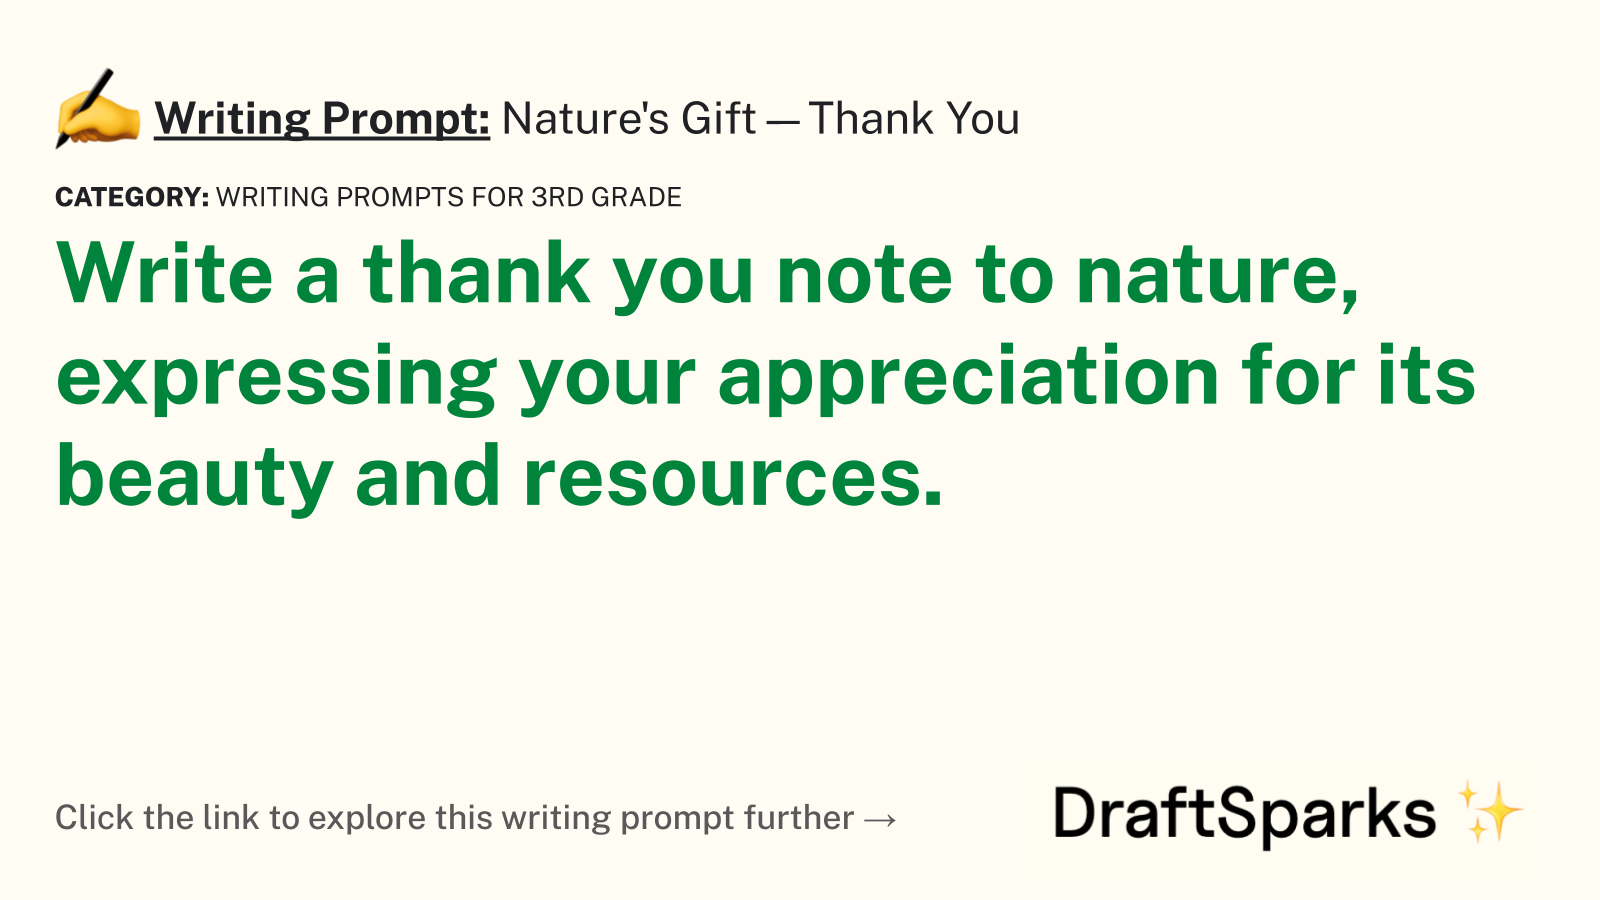 Nature’s Gift—Thank You